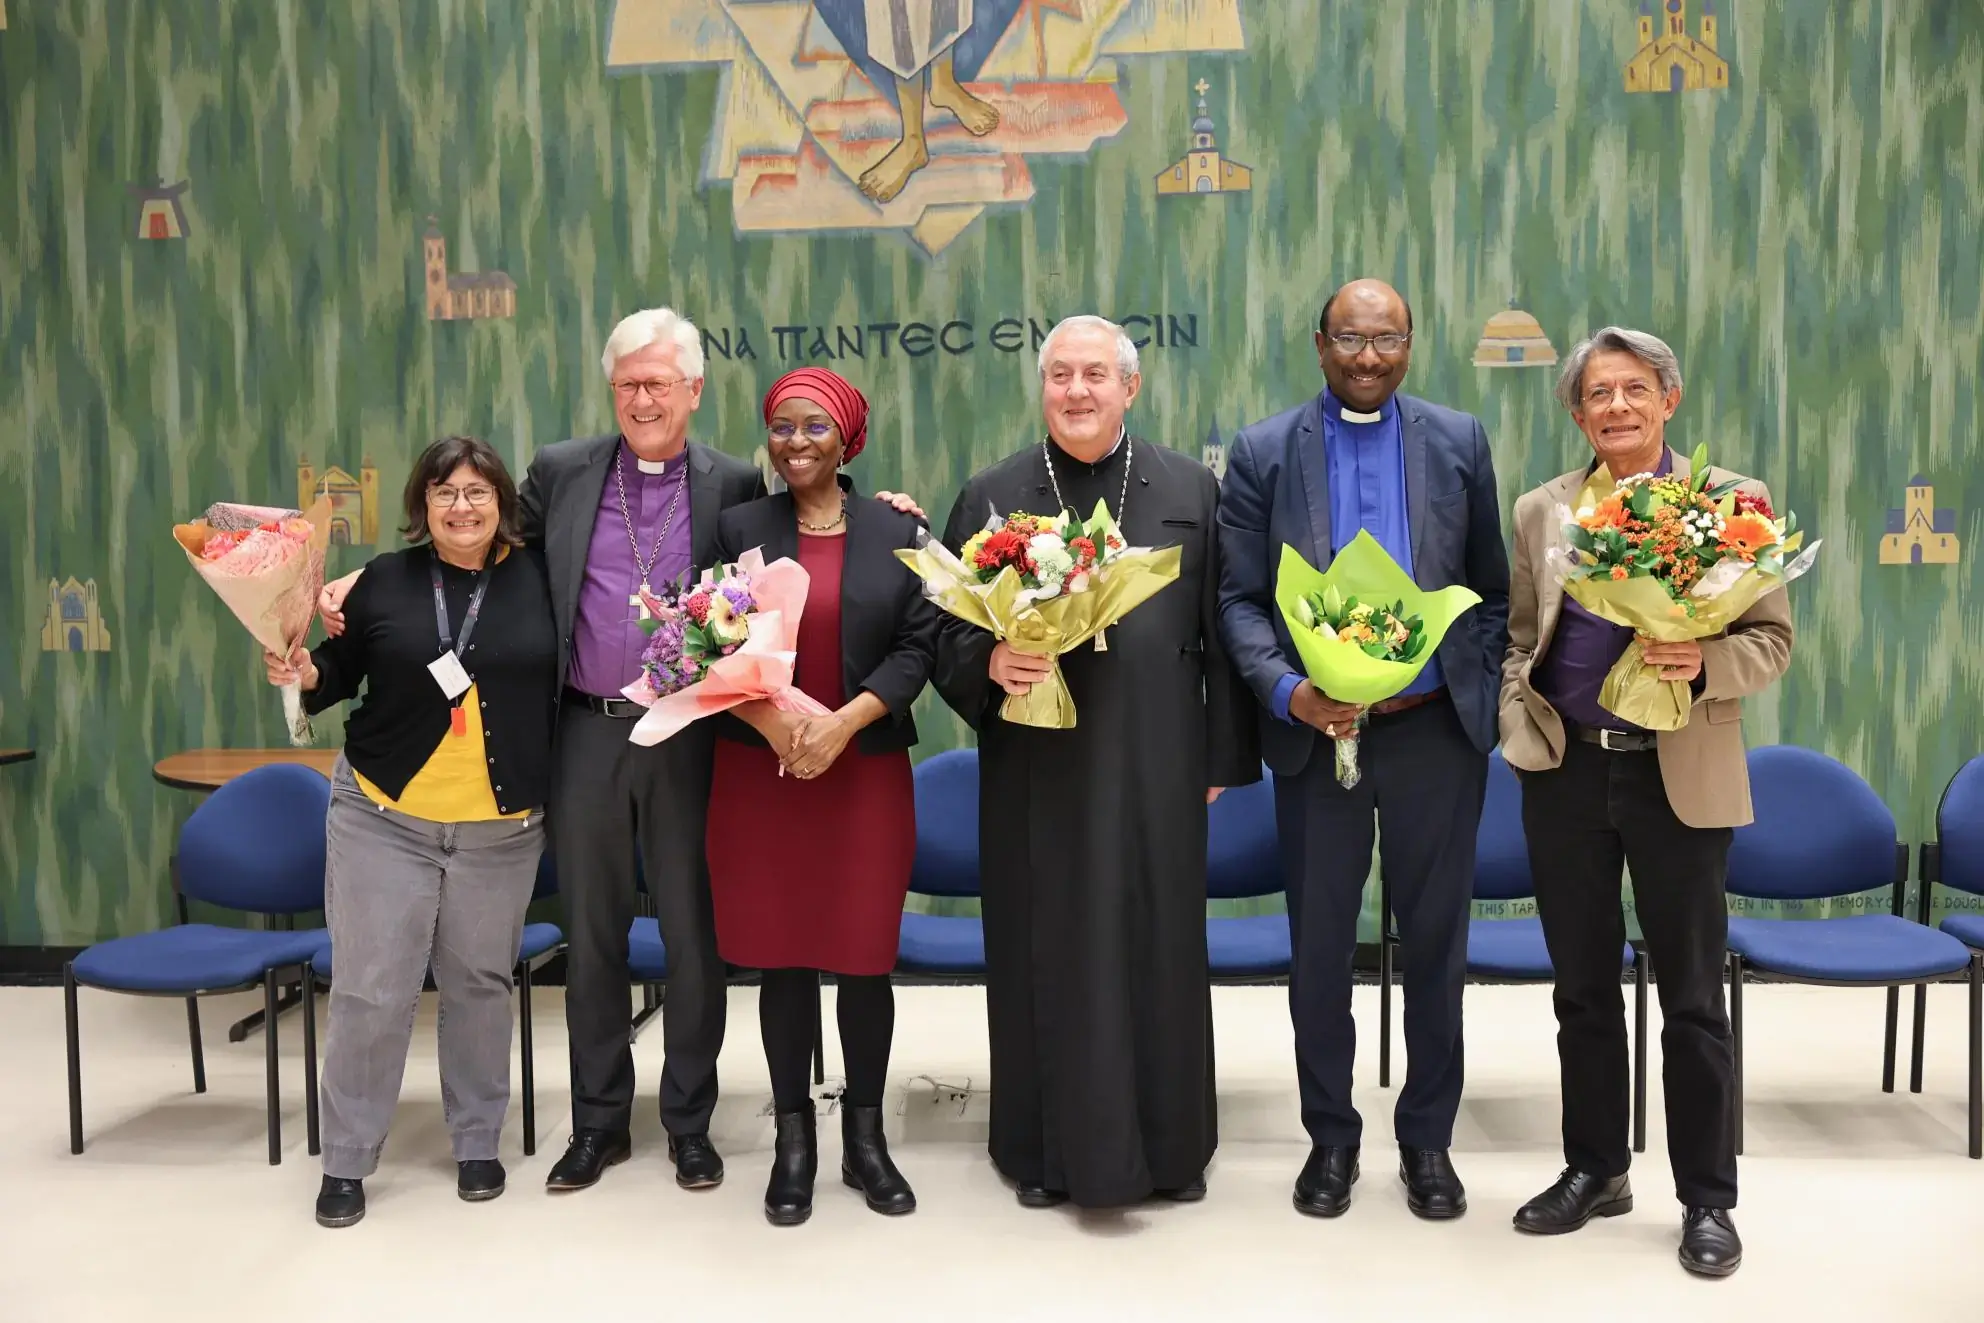 WCC new leadership saying farewell to outgoing colleagues during the closing day of the WCC Executive committee meeting at the Ecumenical Centre in Geneva